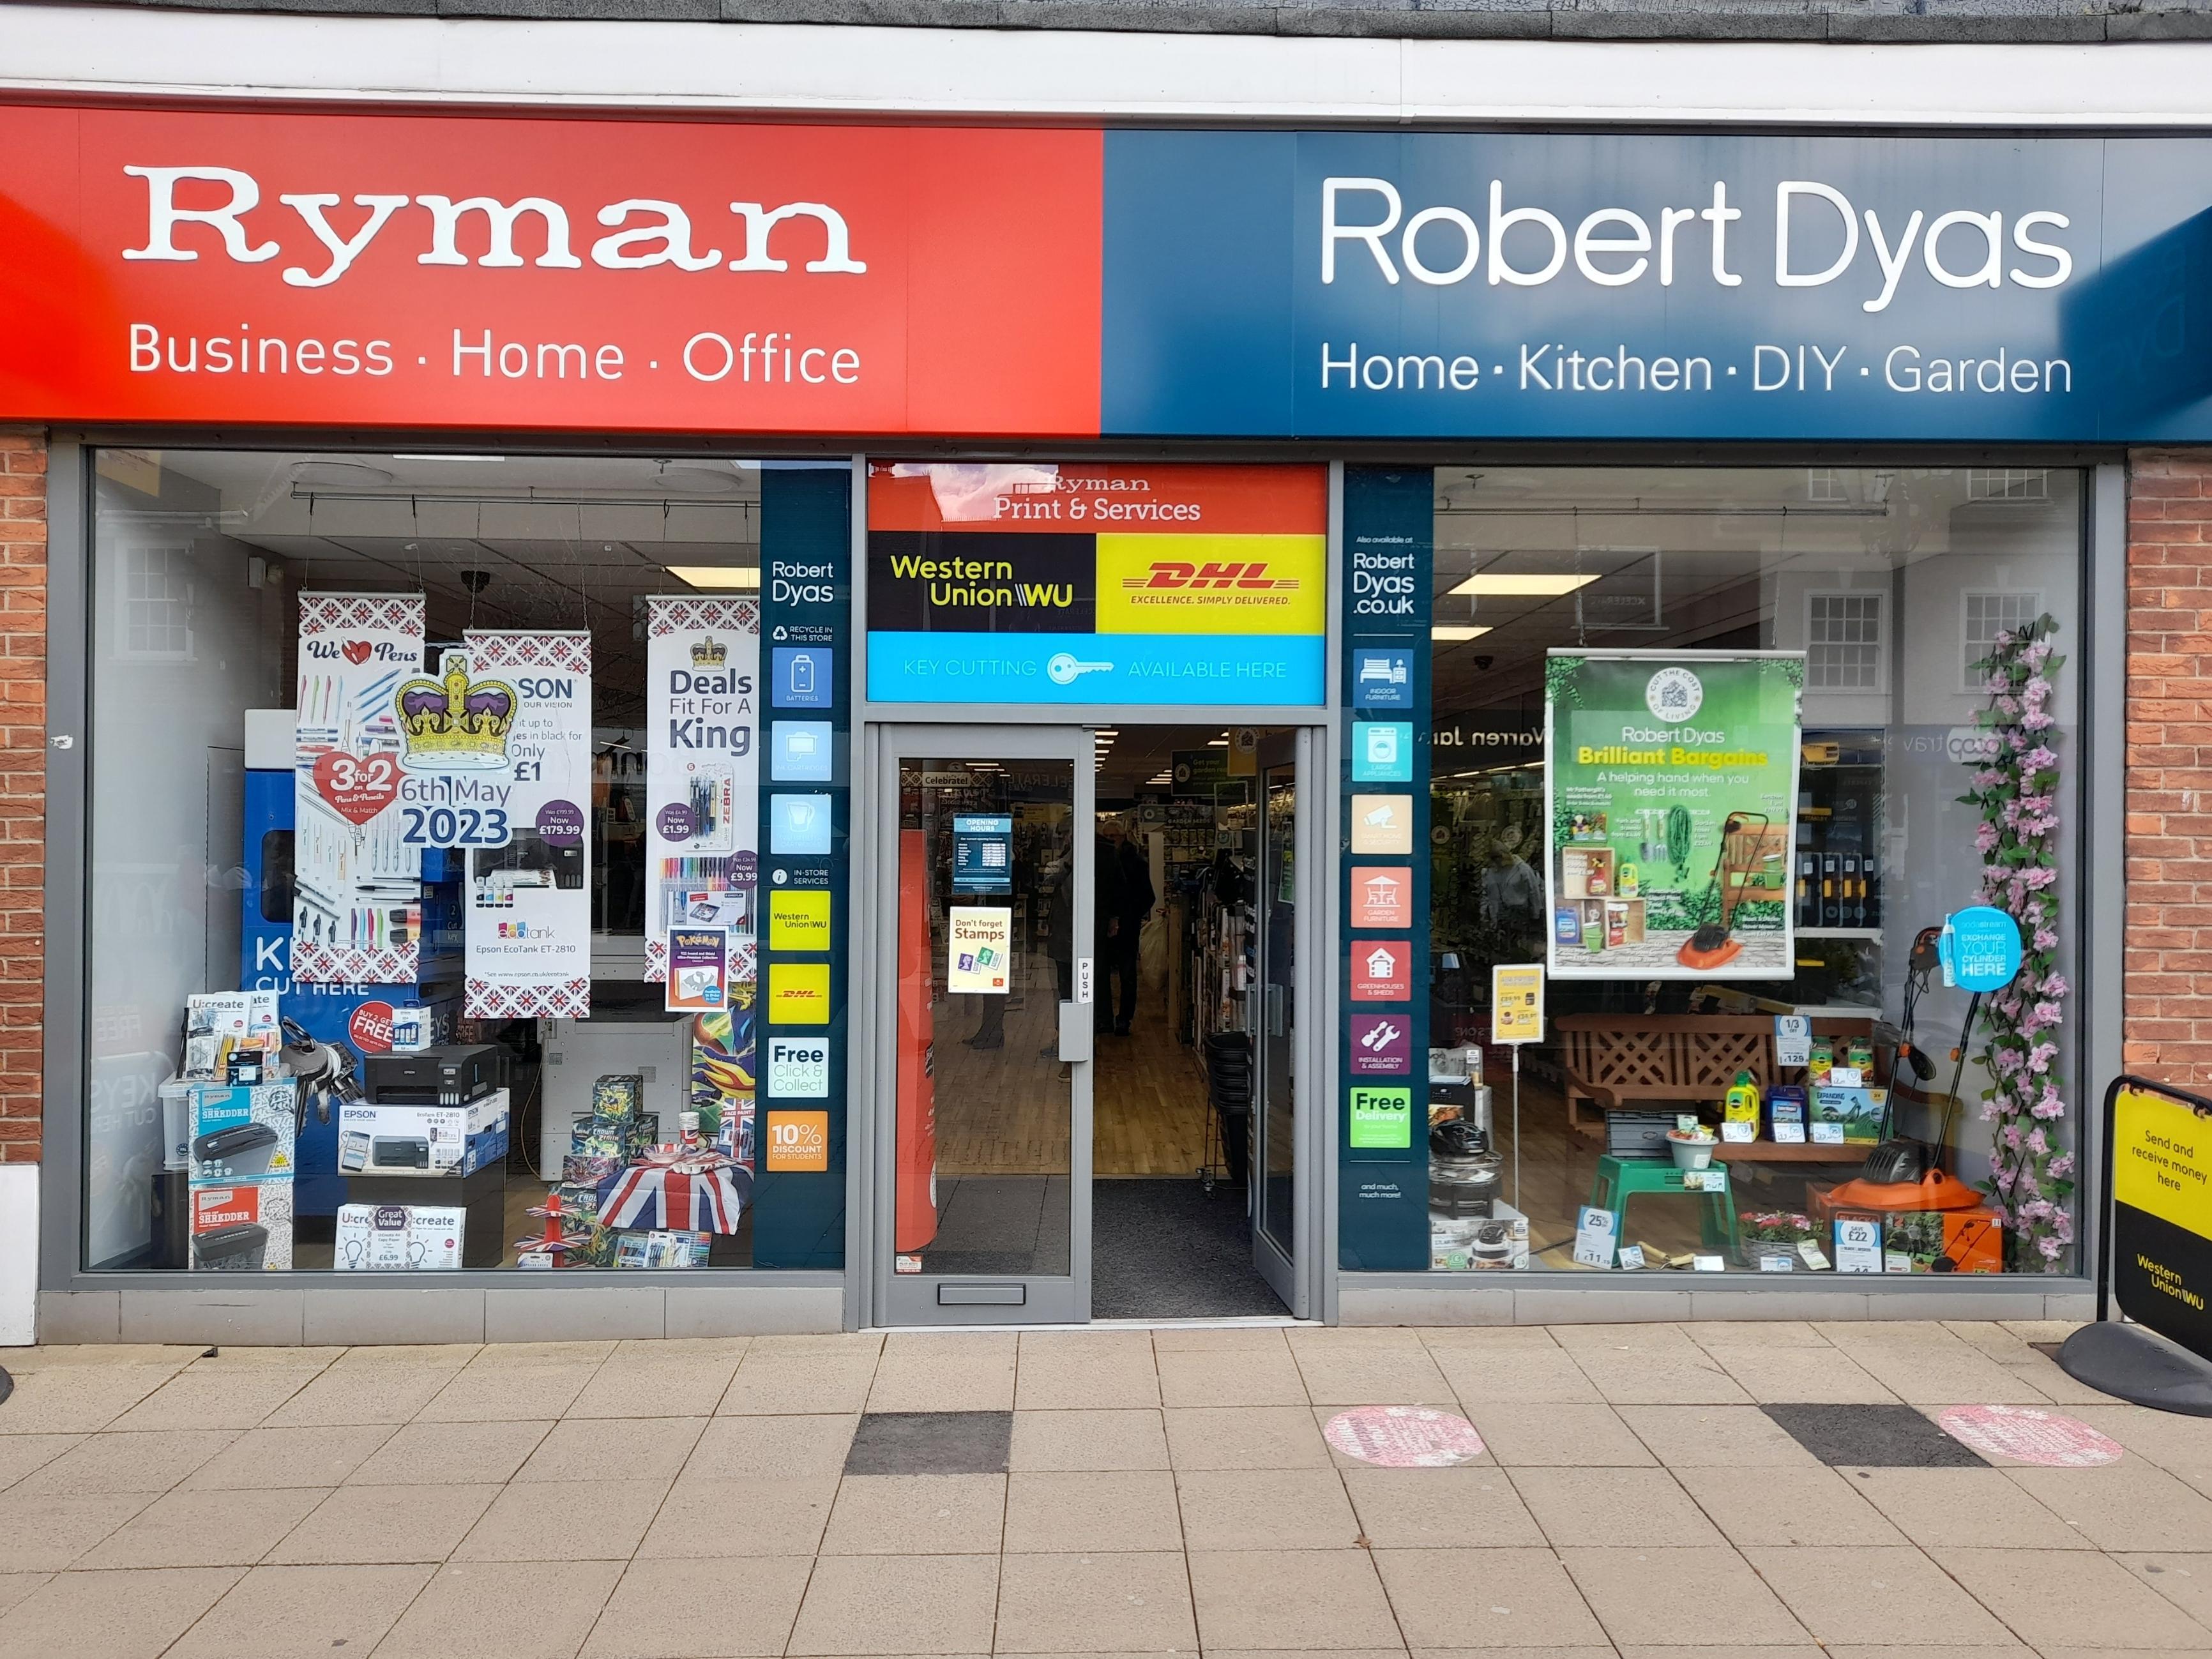 Images DHL Express Service Point (Robert Dyas Solihull)